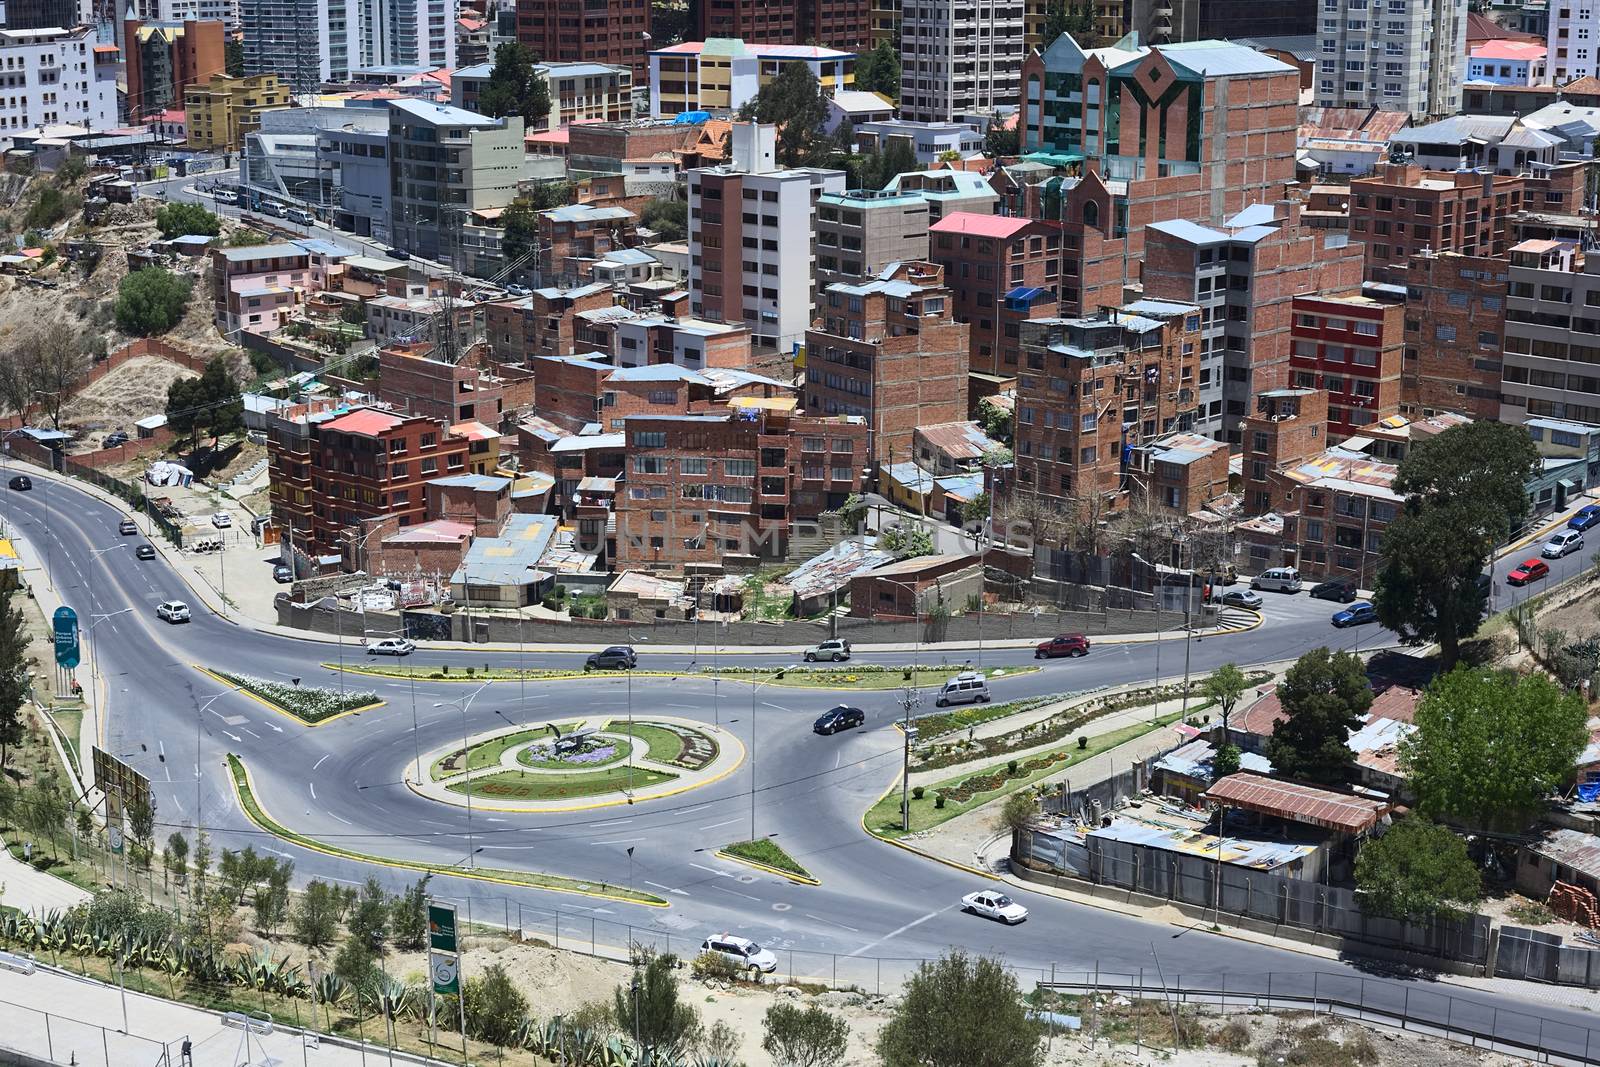 LA PAZ, BOLIVIA - OCTOBER 14, 2014: Roundabout at the crossing of the avenues Del Poeta and Montevideo next to the Parque Urbano Central (Central Urban Park) on October 14, 2014 in La Paz, Bolivia